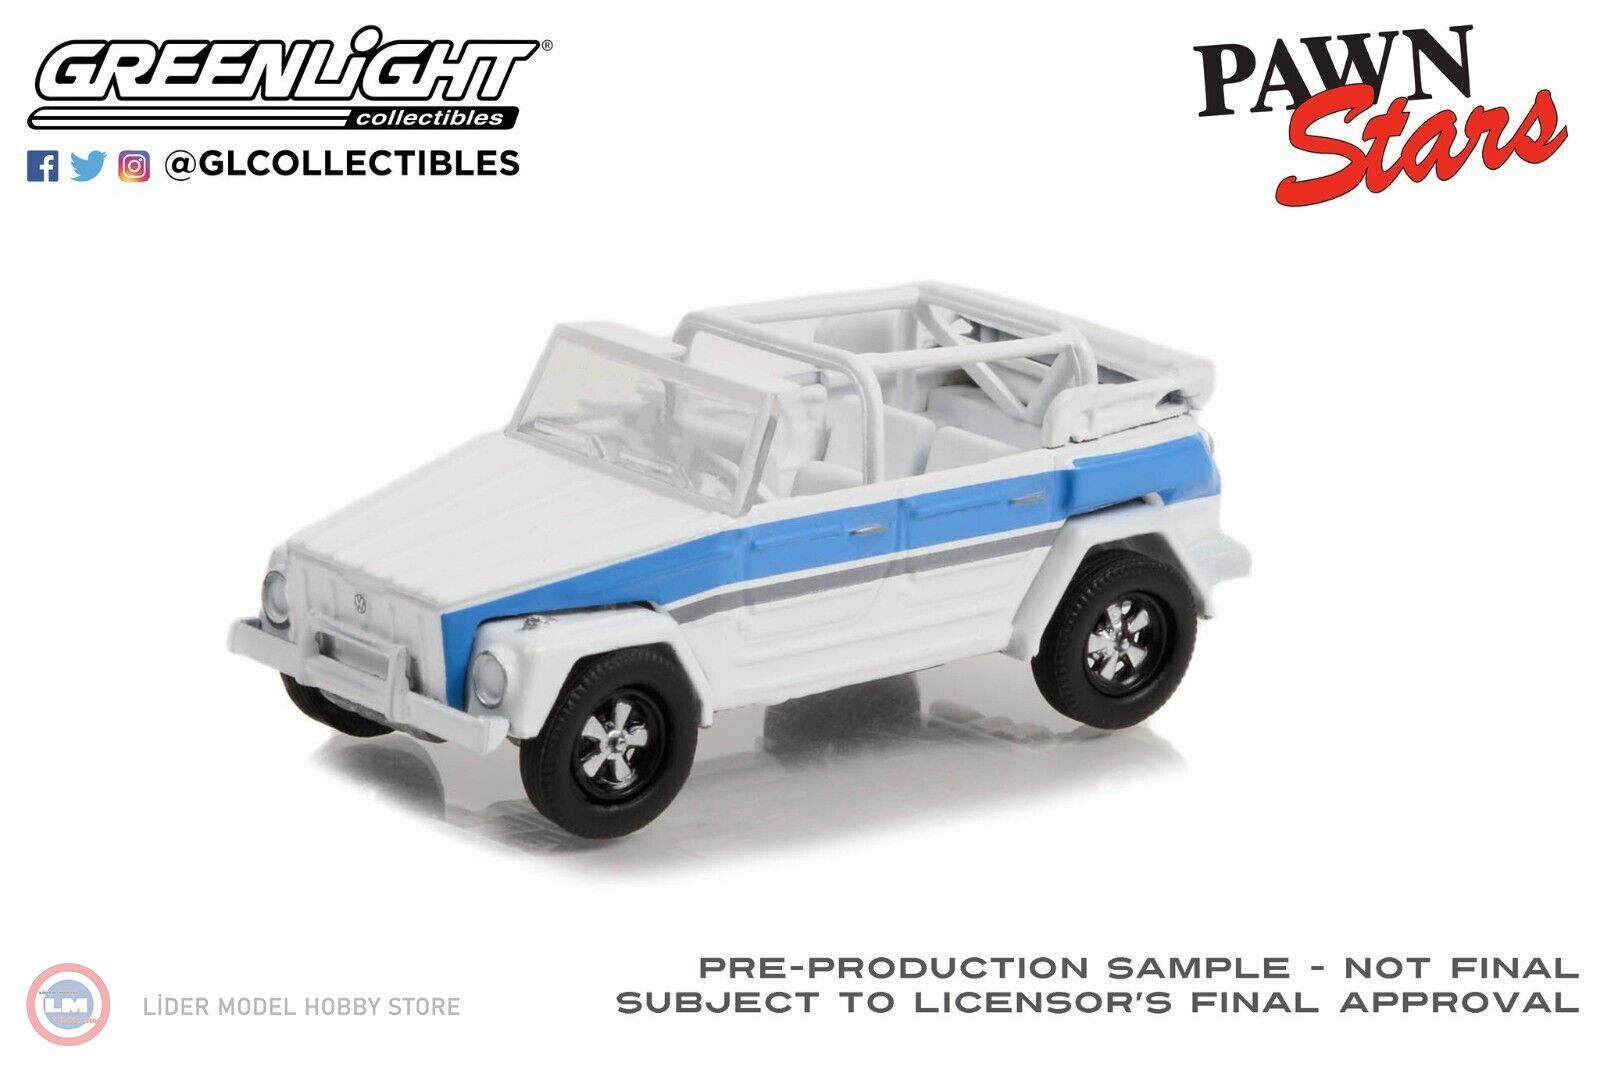 1:64 1974 Volkswagen Thing (Type 181) - Pawn Stars (TV Series 2009-Current)